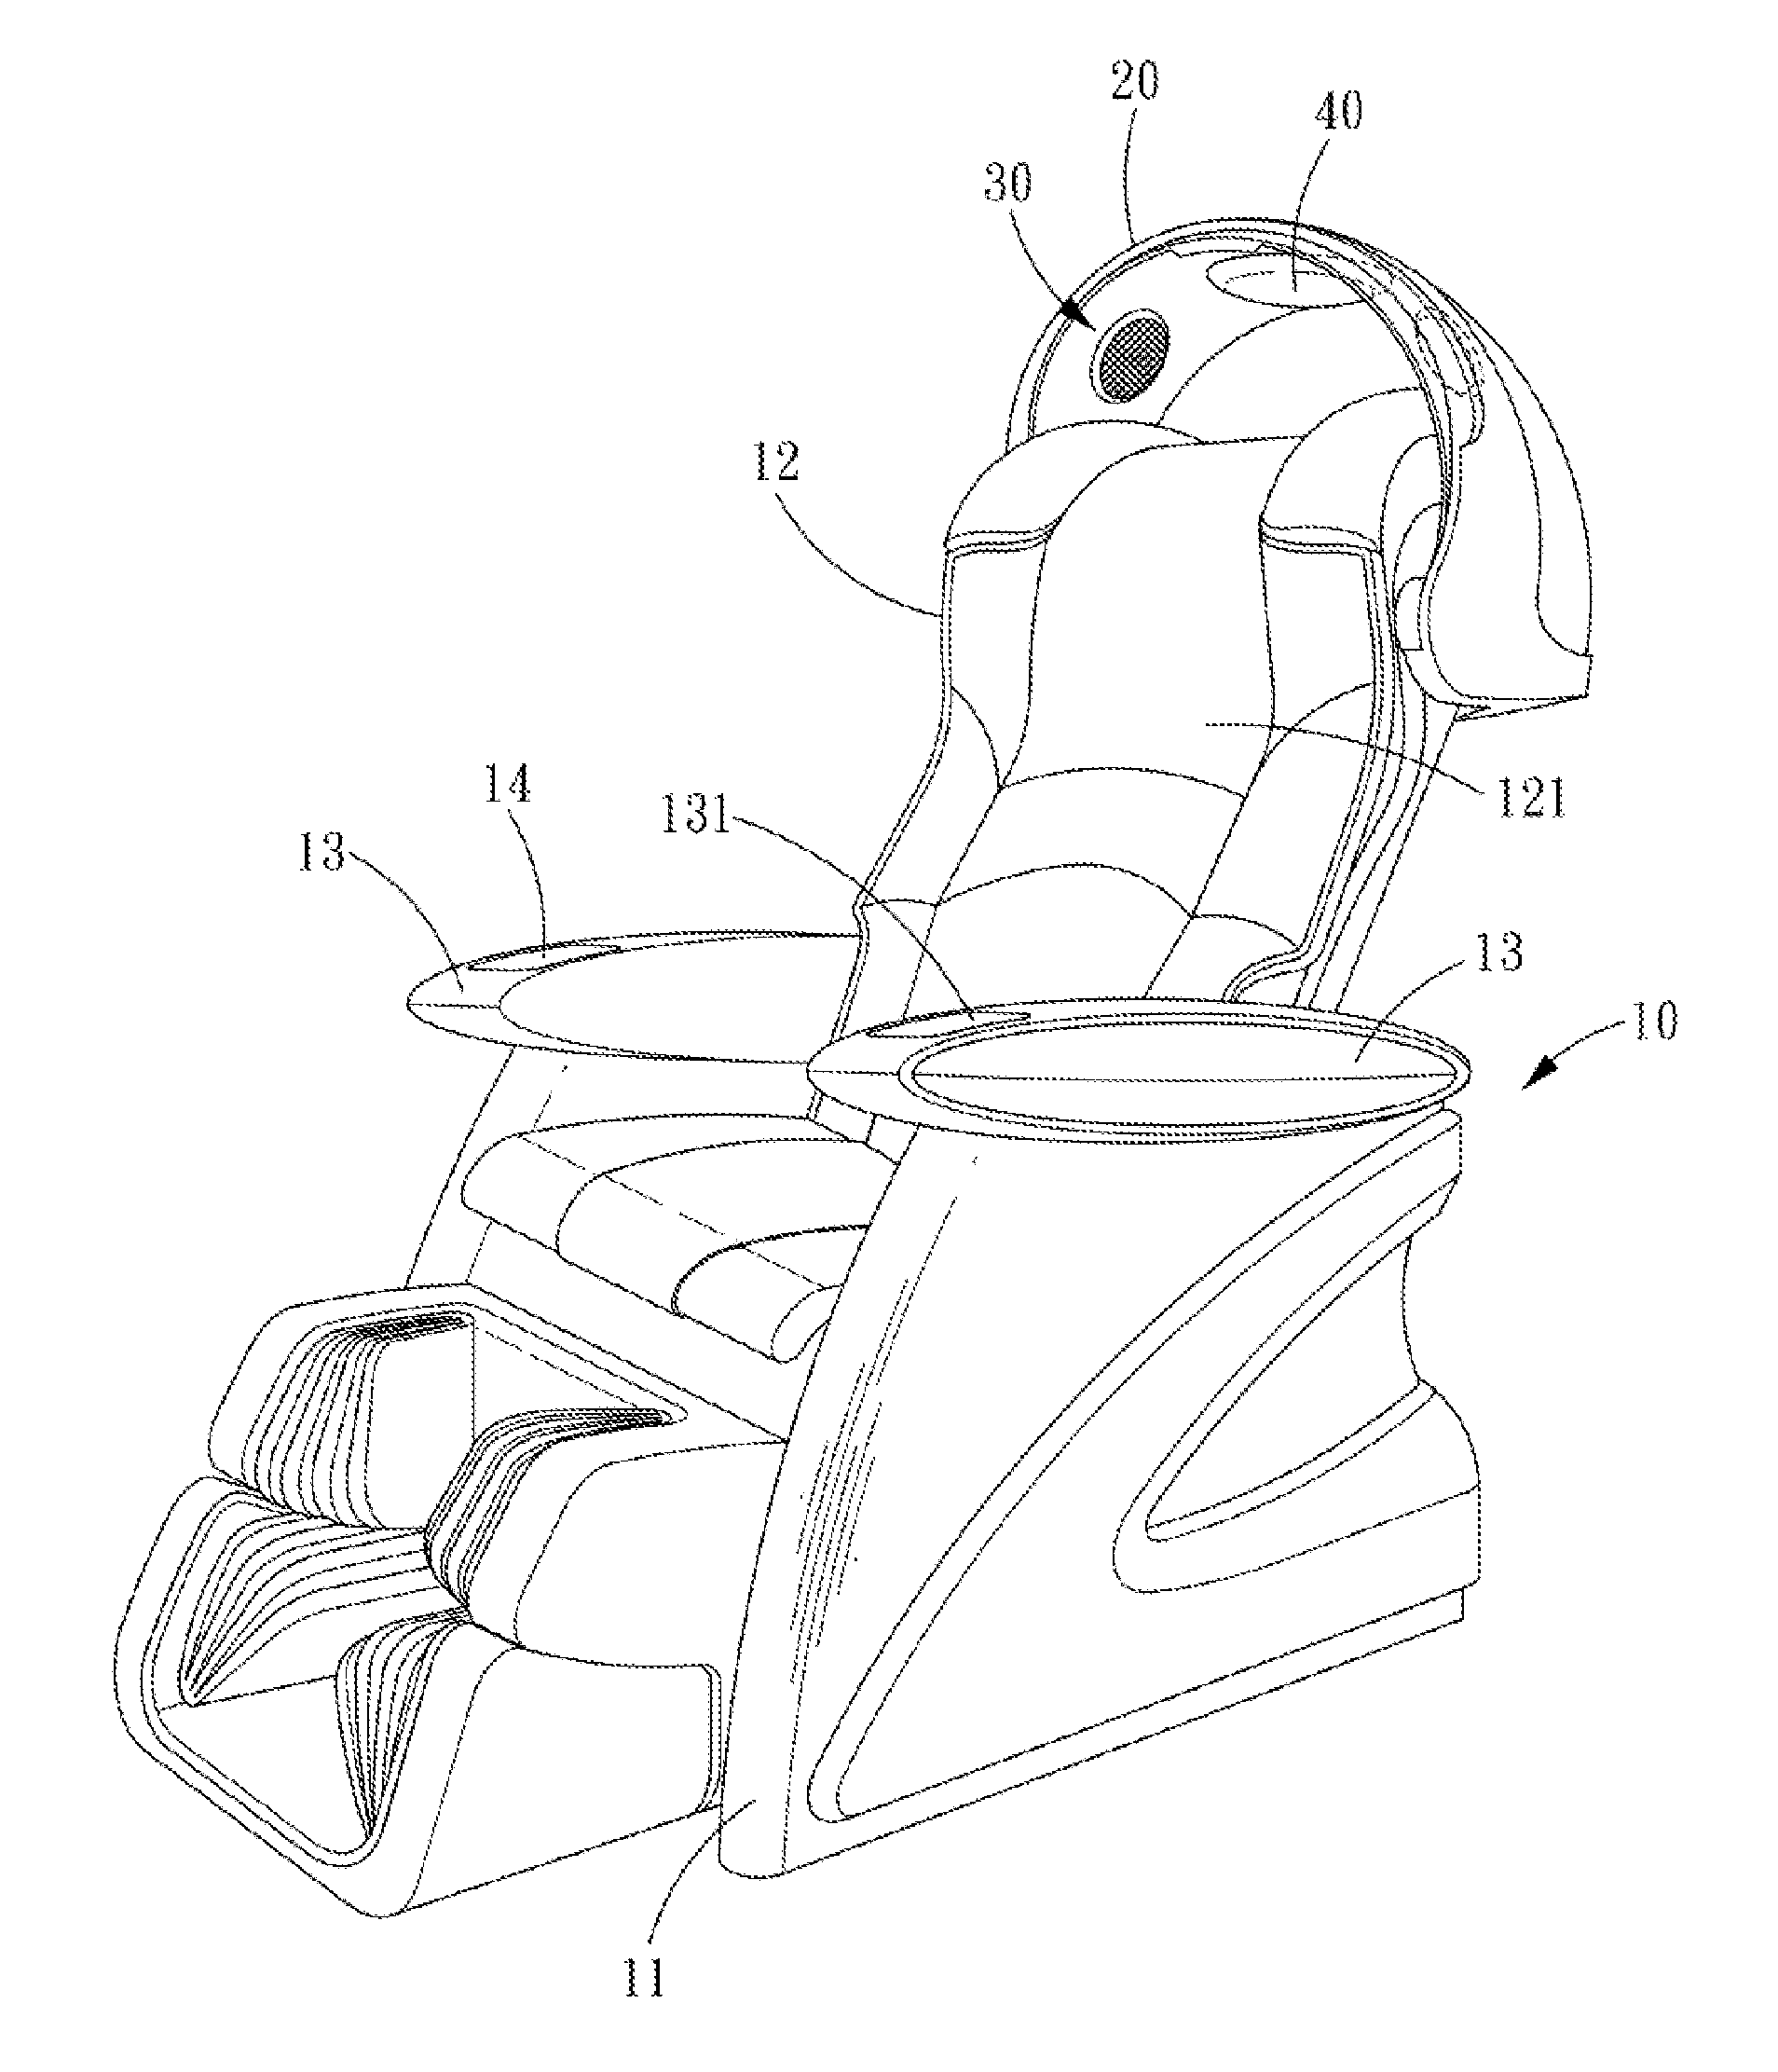 Massage Chair With Function of Stress Relaxation and Sleep Inducing